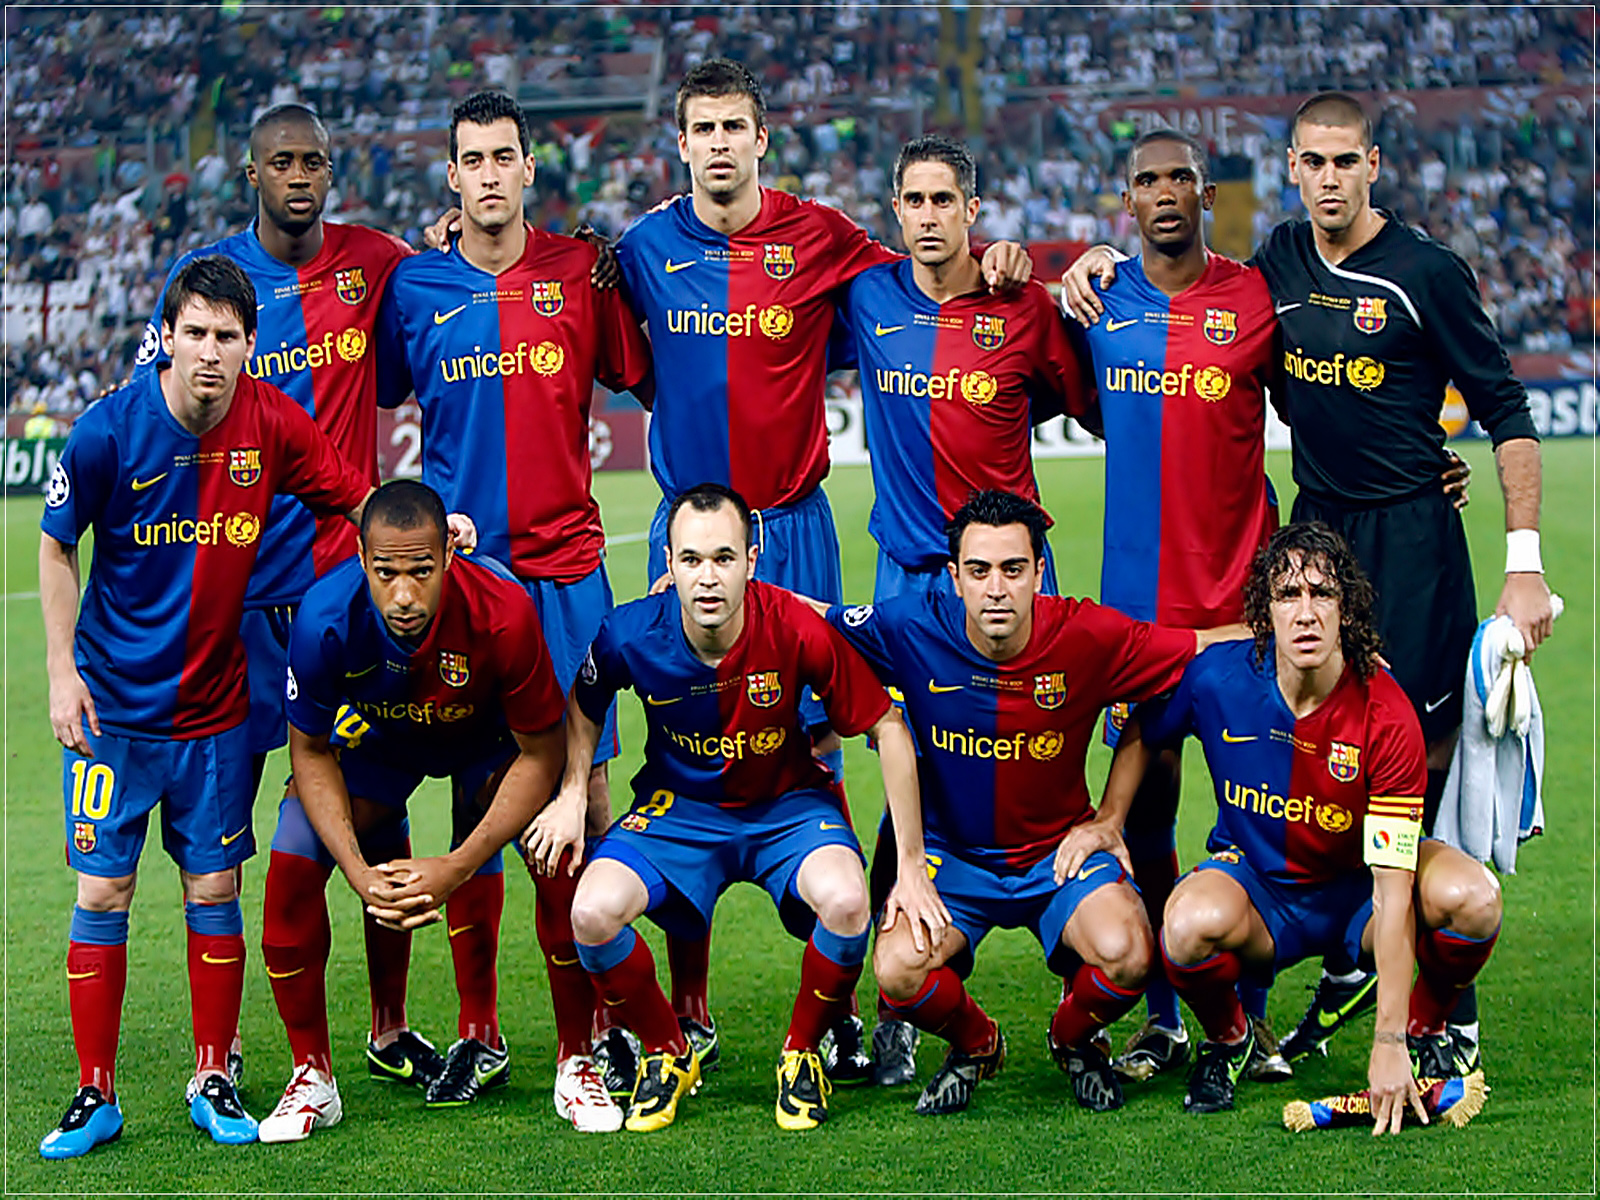 COOL IMAGES: FC Barcelona team Wallpapers